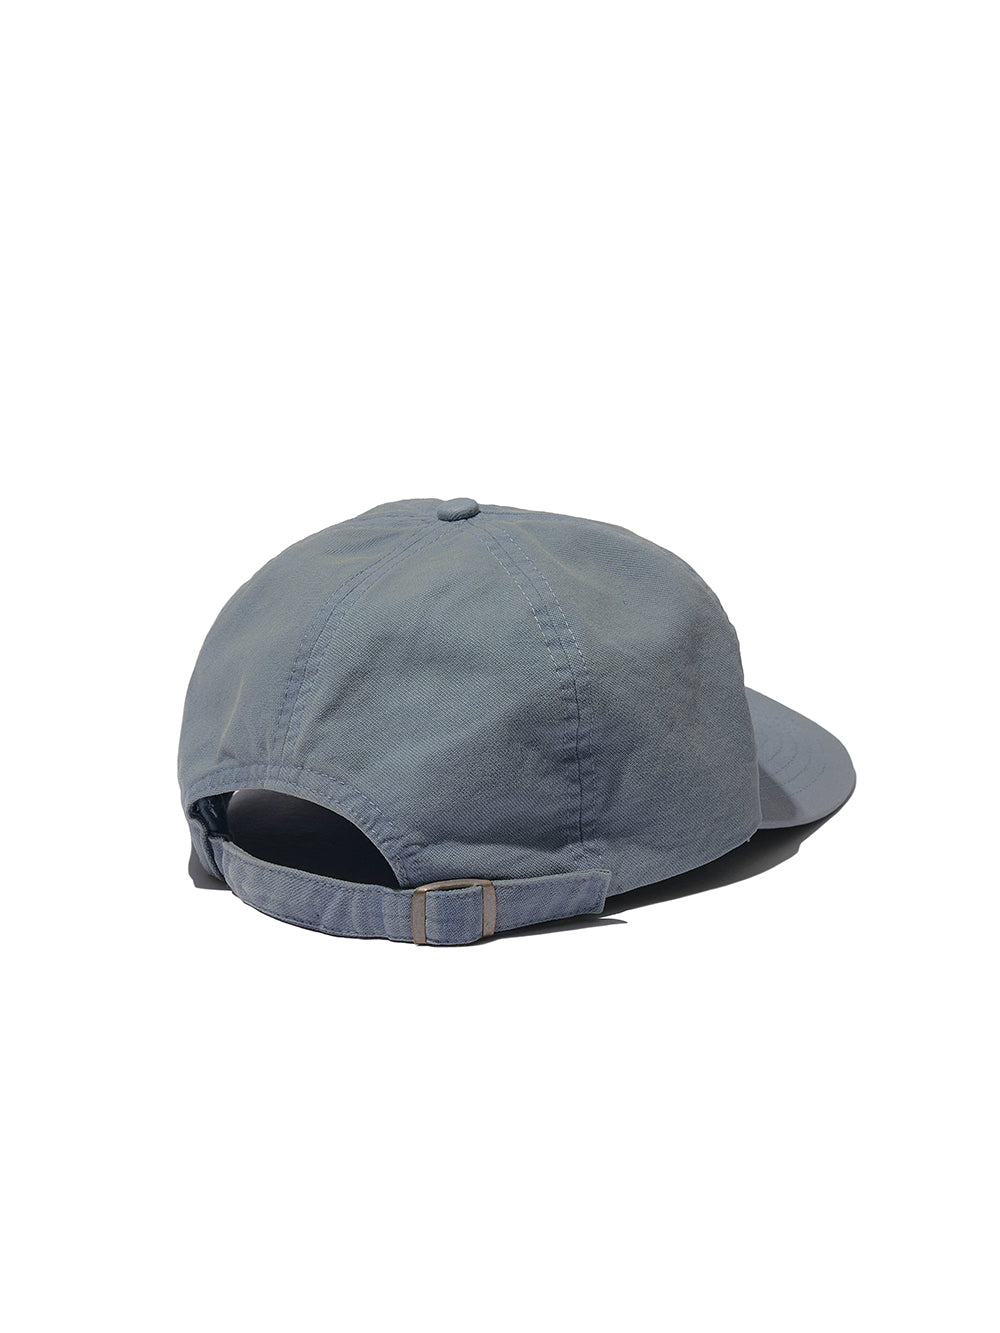 Vintage Washed Sunlight Ball Cap in Blue